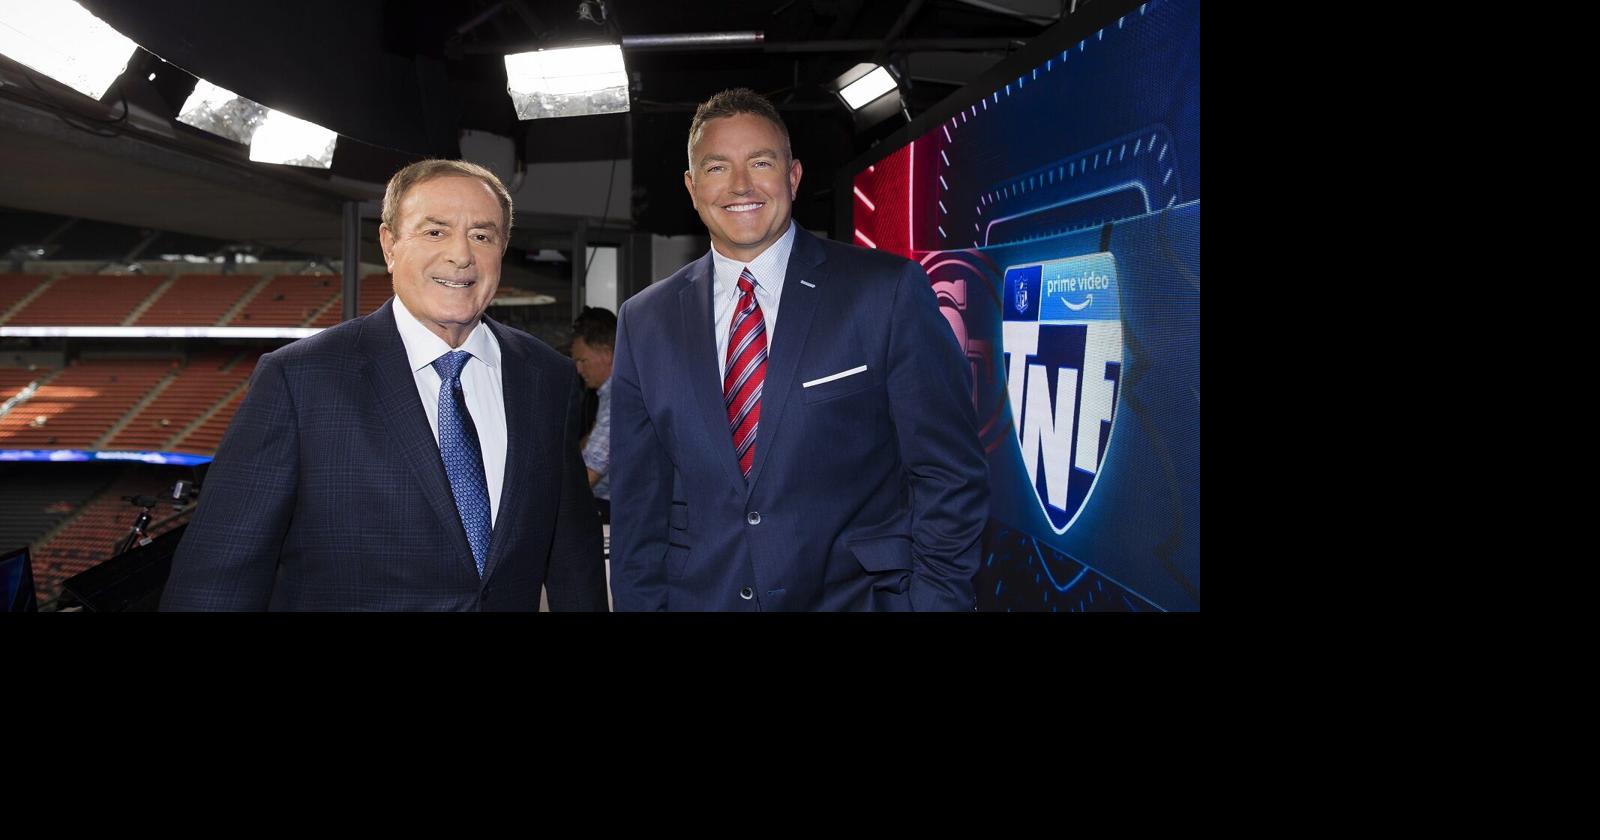 Don't feel sorry for Al Michaels. He's enjoying being a pioneer on